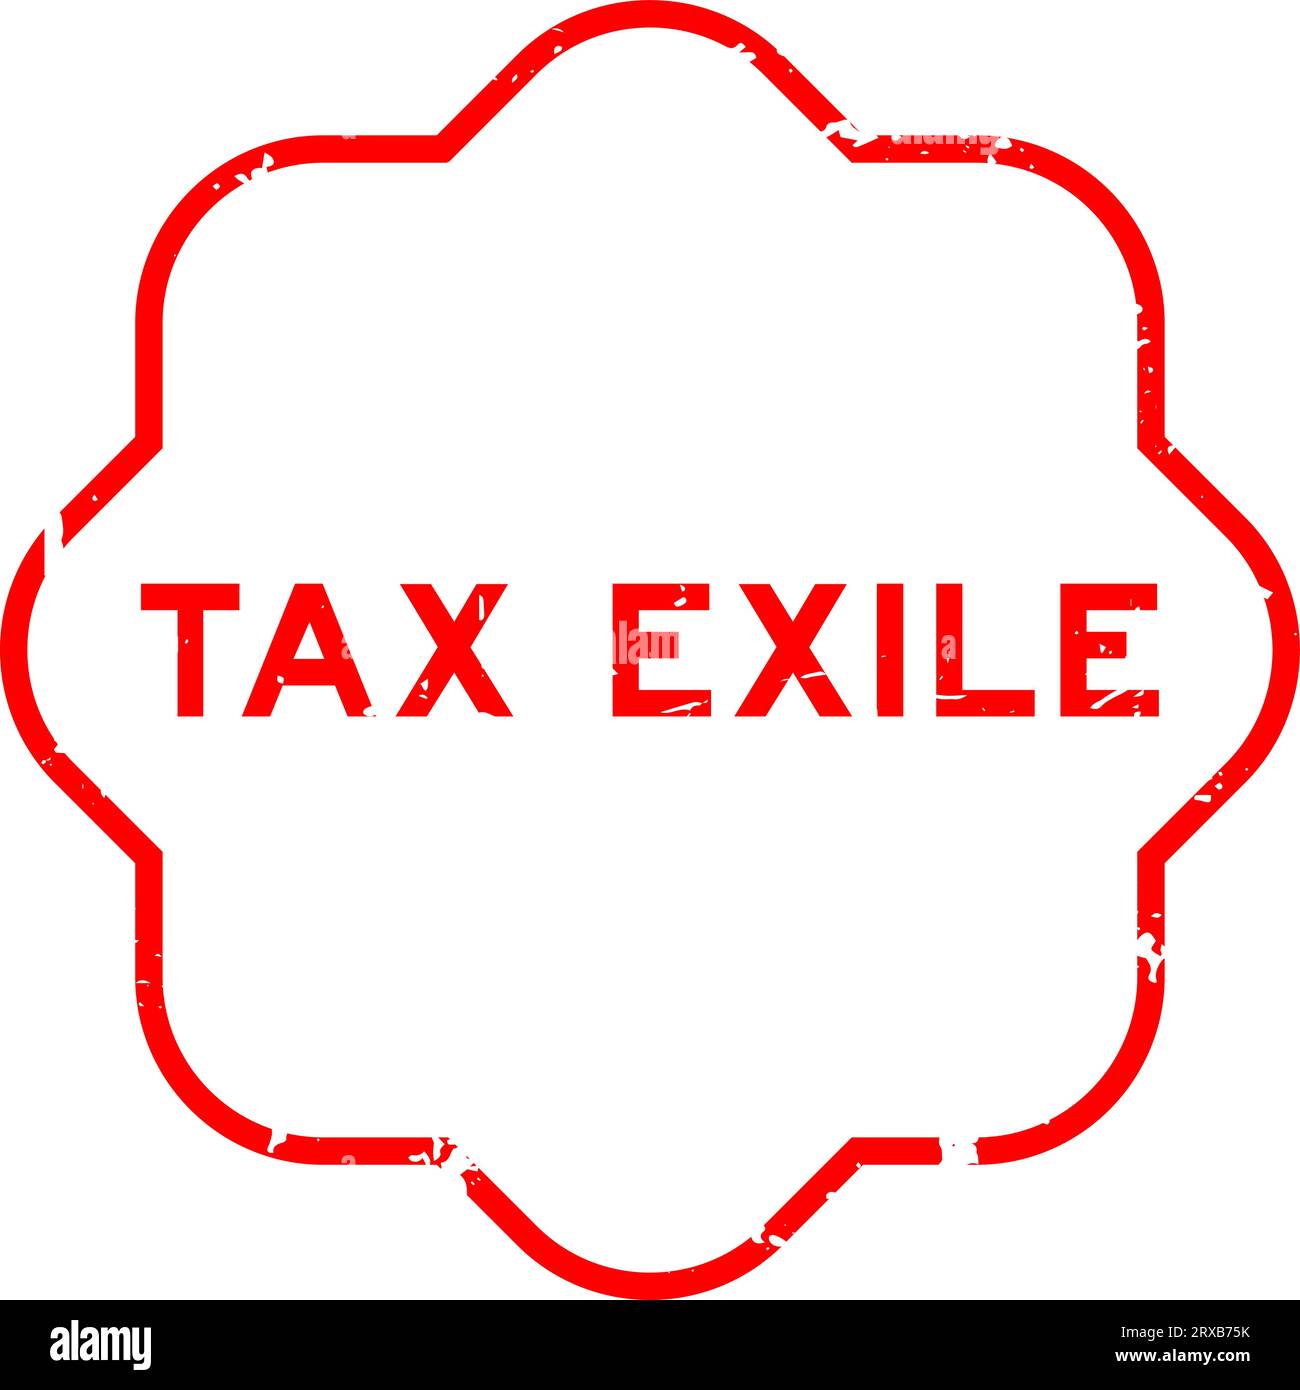 Grunge red tax exile word rubber seal stamp on white background Stock Vector